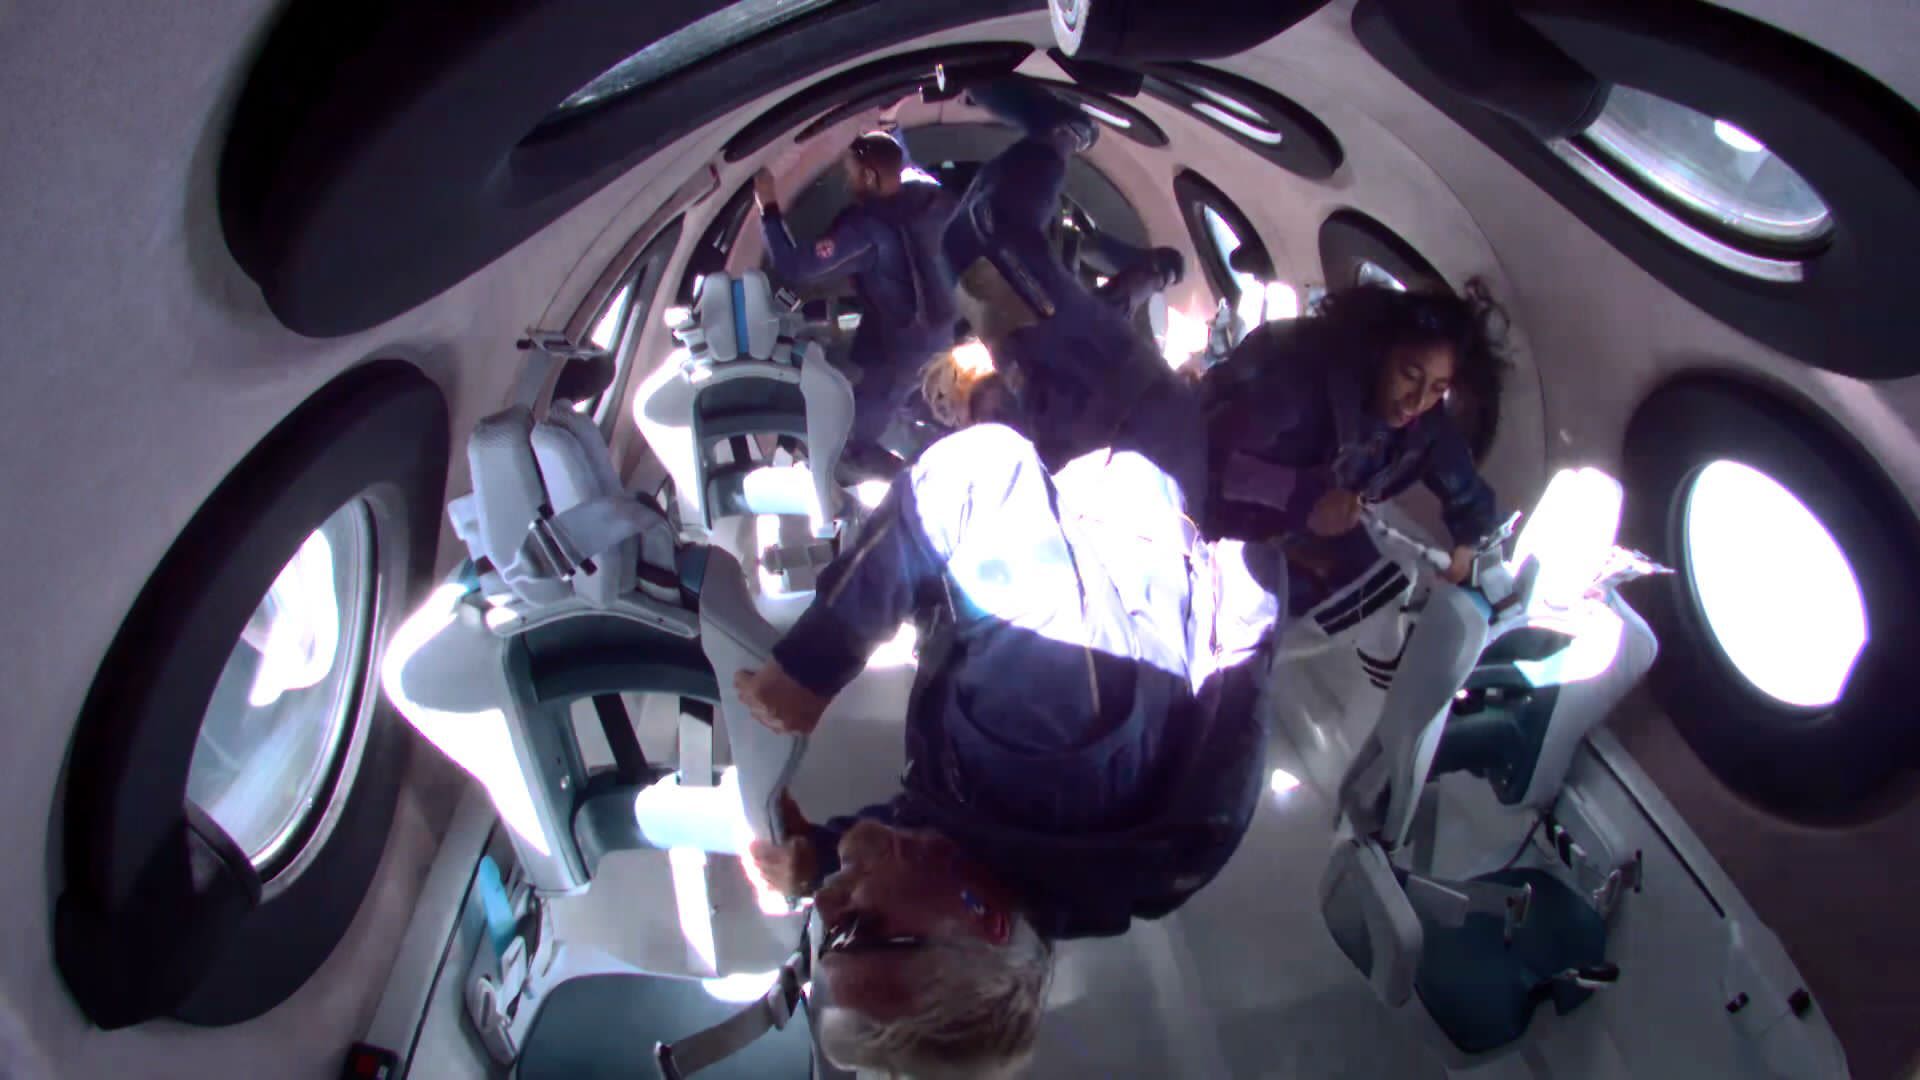 Richard Branson onboard Unity 22 mission with Virgin Galactic